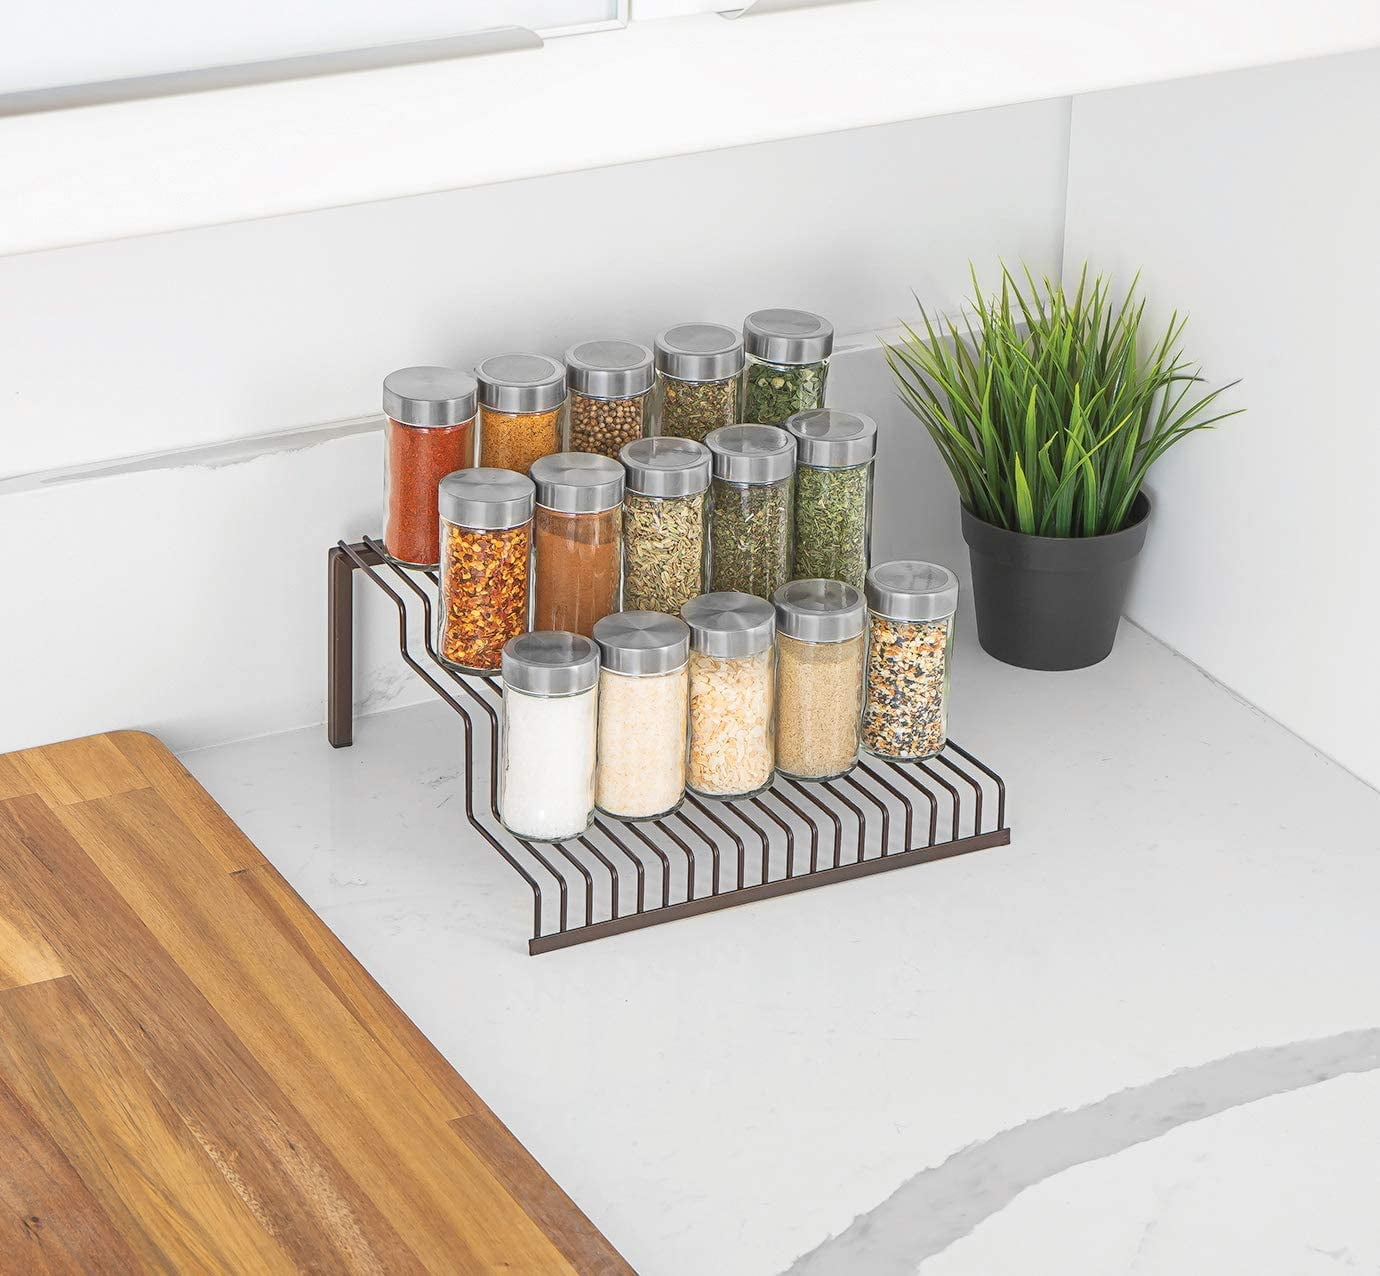 Clear Acrylic Spice Drawer Organizer, 4 Tier- 2 Set Expandable From 13 to  26 Seasoning Jars Drawers Insert, Kitchen Spice Rack Tray for